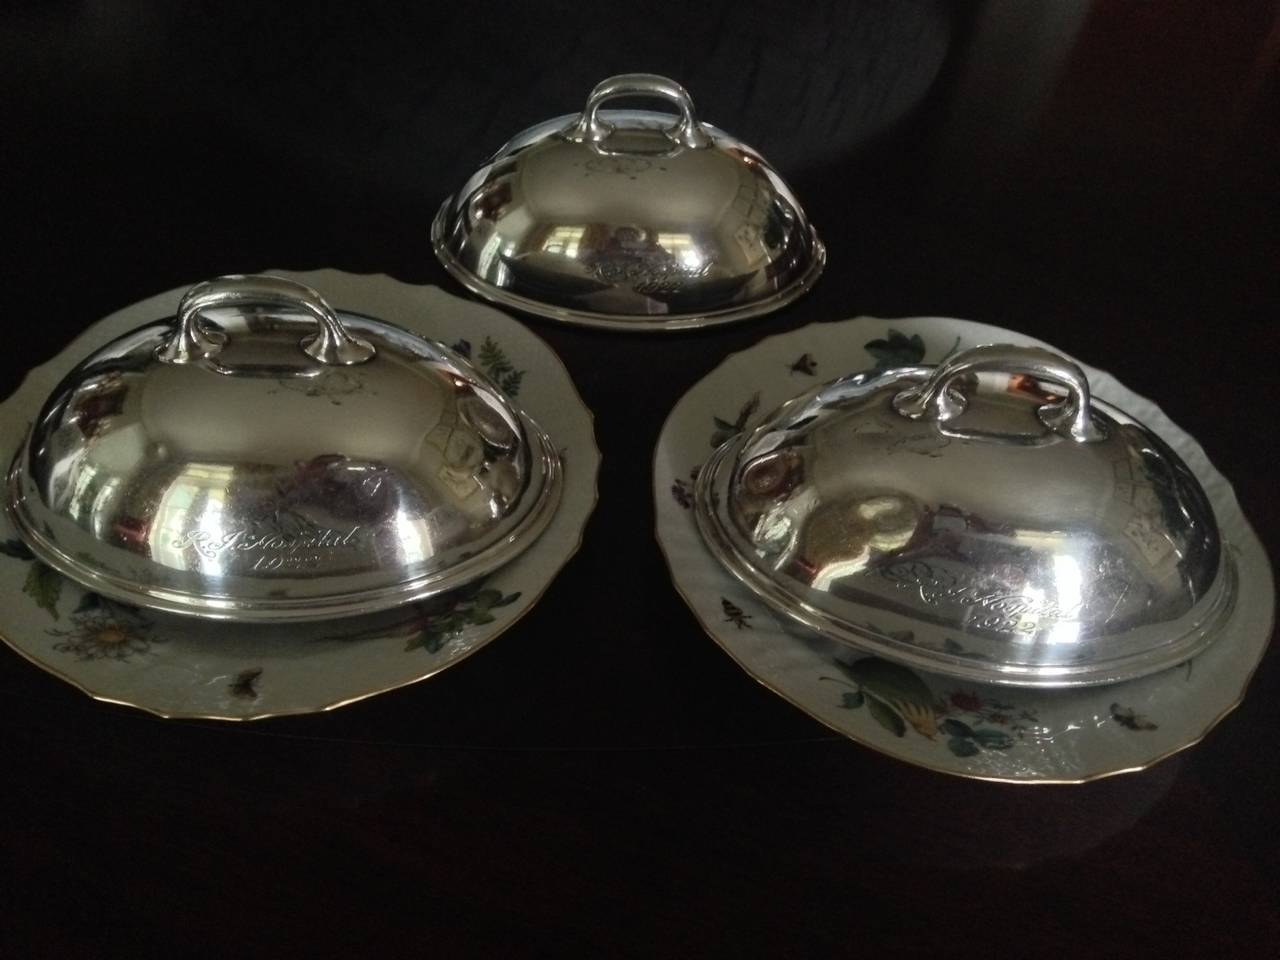 Three Small Silver Dish Covers or Food Warmers, American, 1920s In Excellent Condition For Sale In Savannah, GA